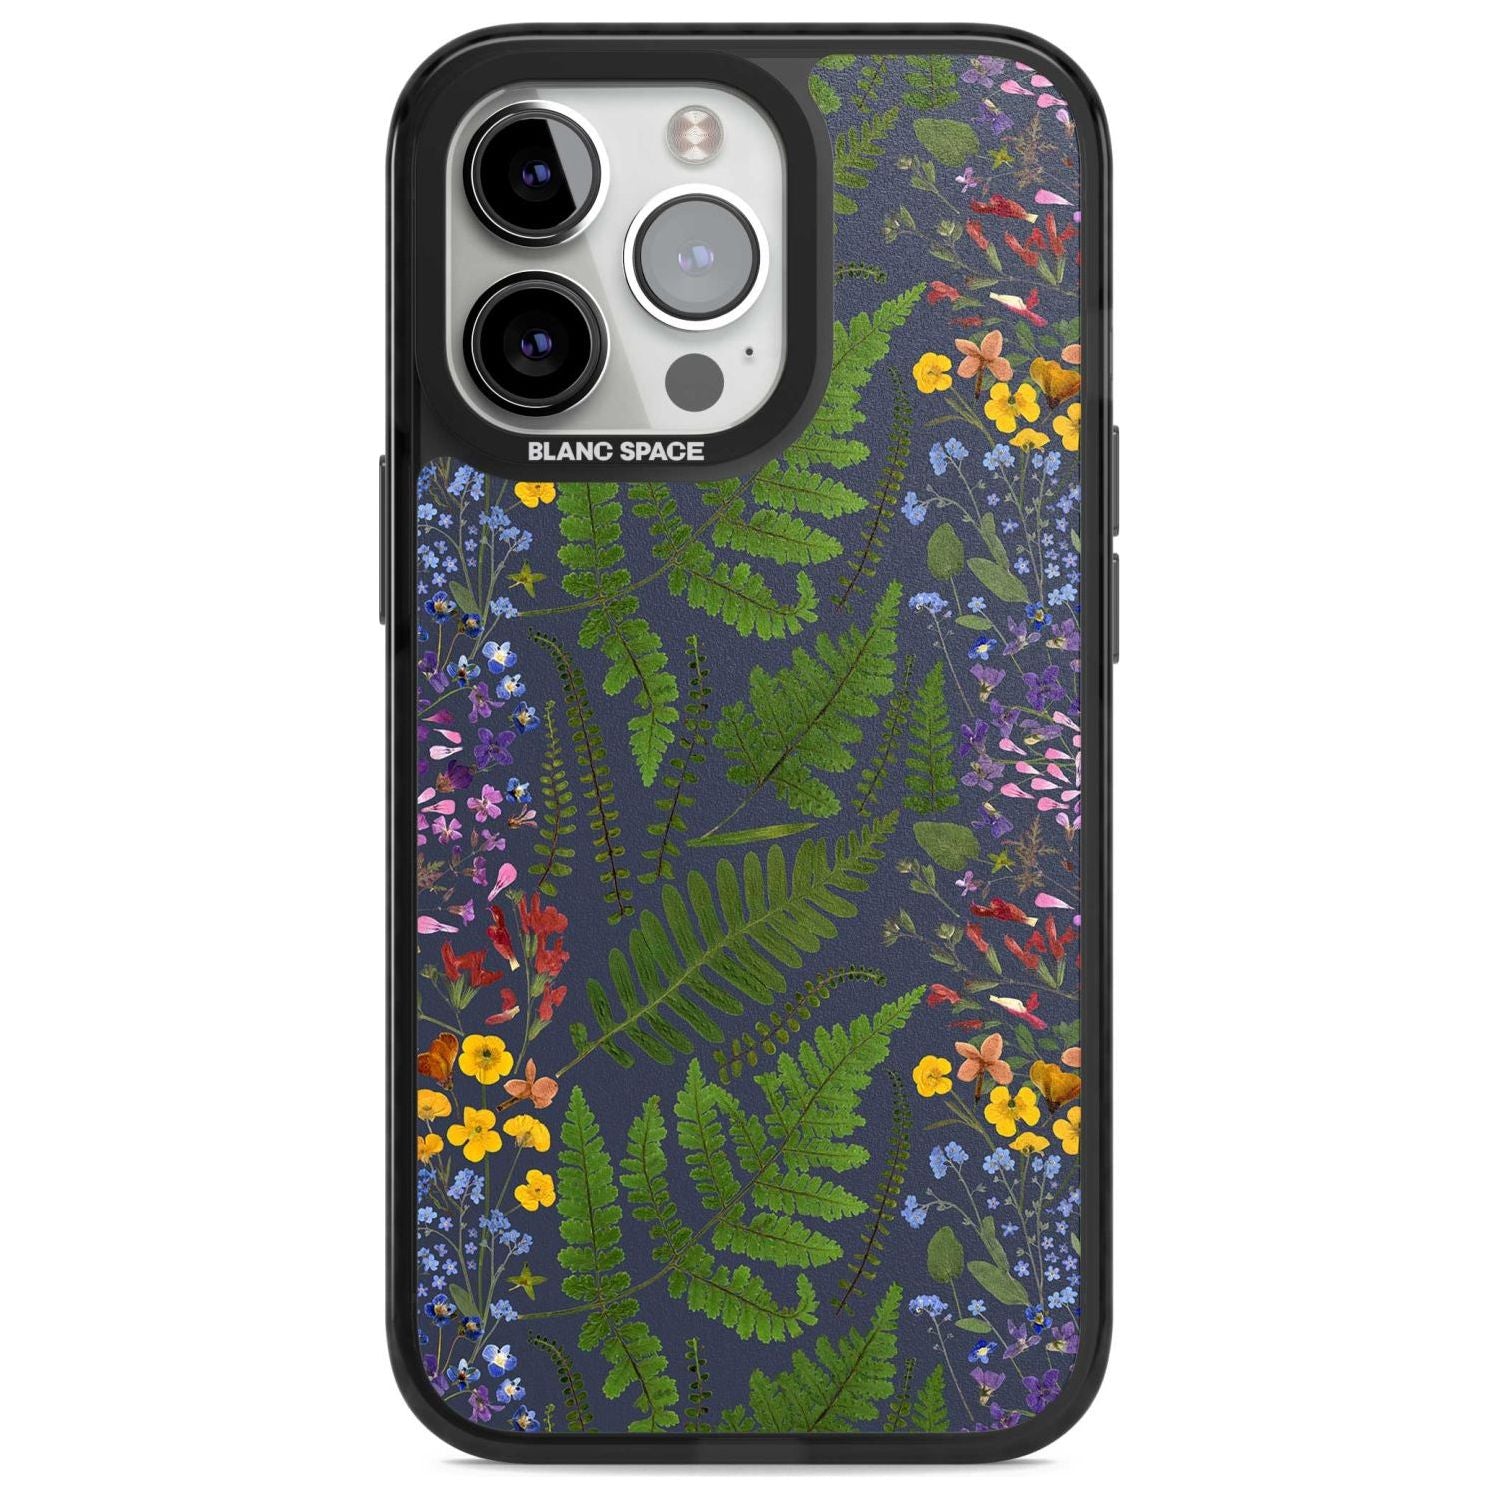 Busy Floral and Fern Design - Navy Phone Case iPhone 15 Pro Max / Magsafe Black Impact Case,iPhone 15 Pro / Magsafe Black Impact Case,iPhone 14 Pro Max / Magsafe Black Impact Case,iPhone 14 Pro / Magsafe Black Impact Case,iPhone 13 Pro / Magsafe Black Impact Case Blanc Space